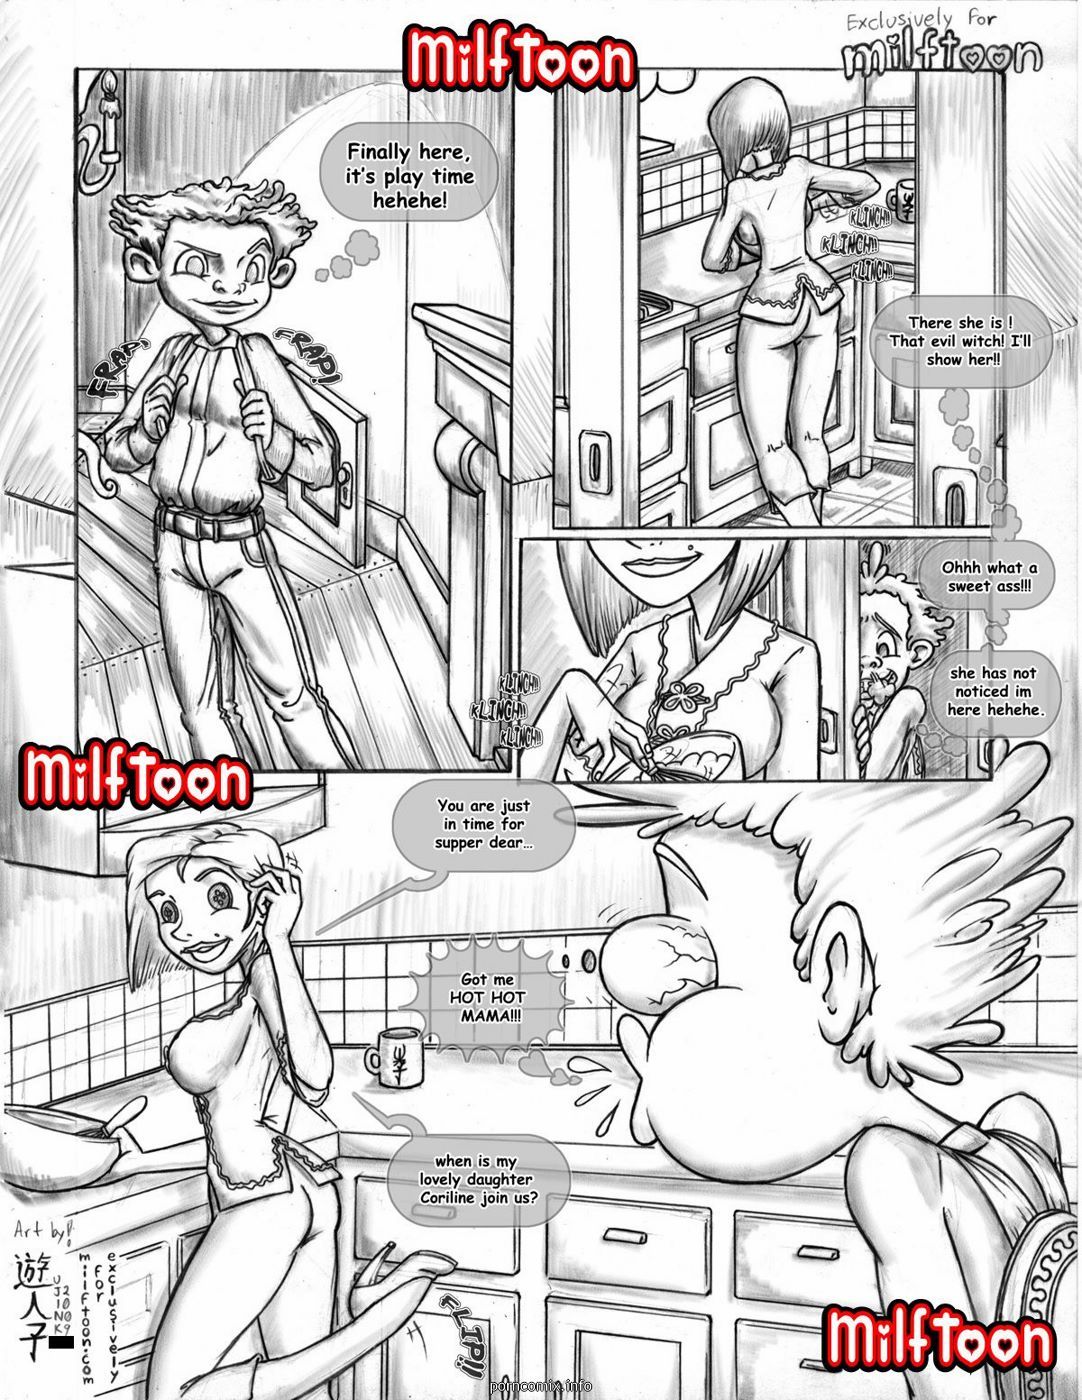 Milftoon - Coraline page 1